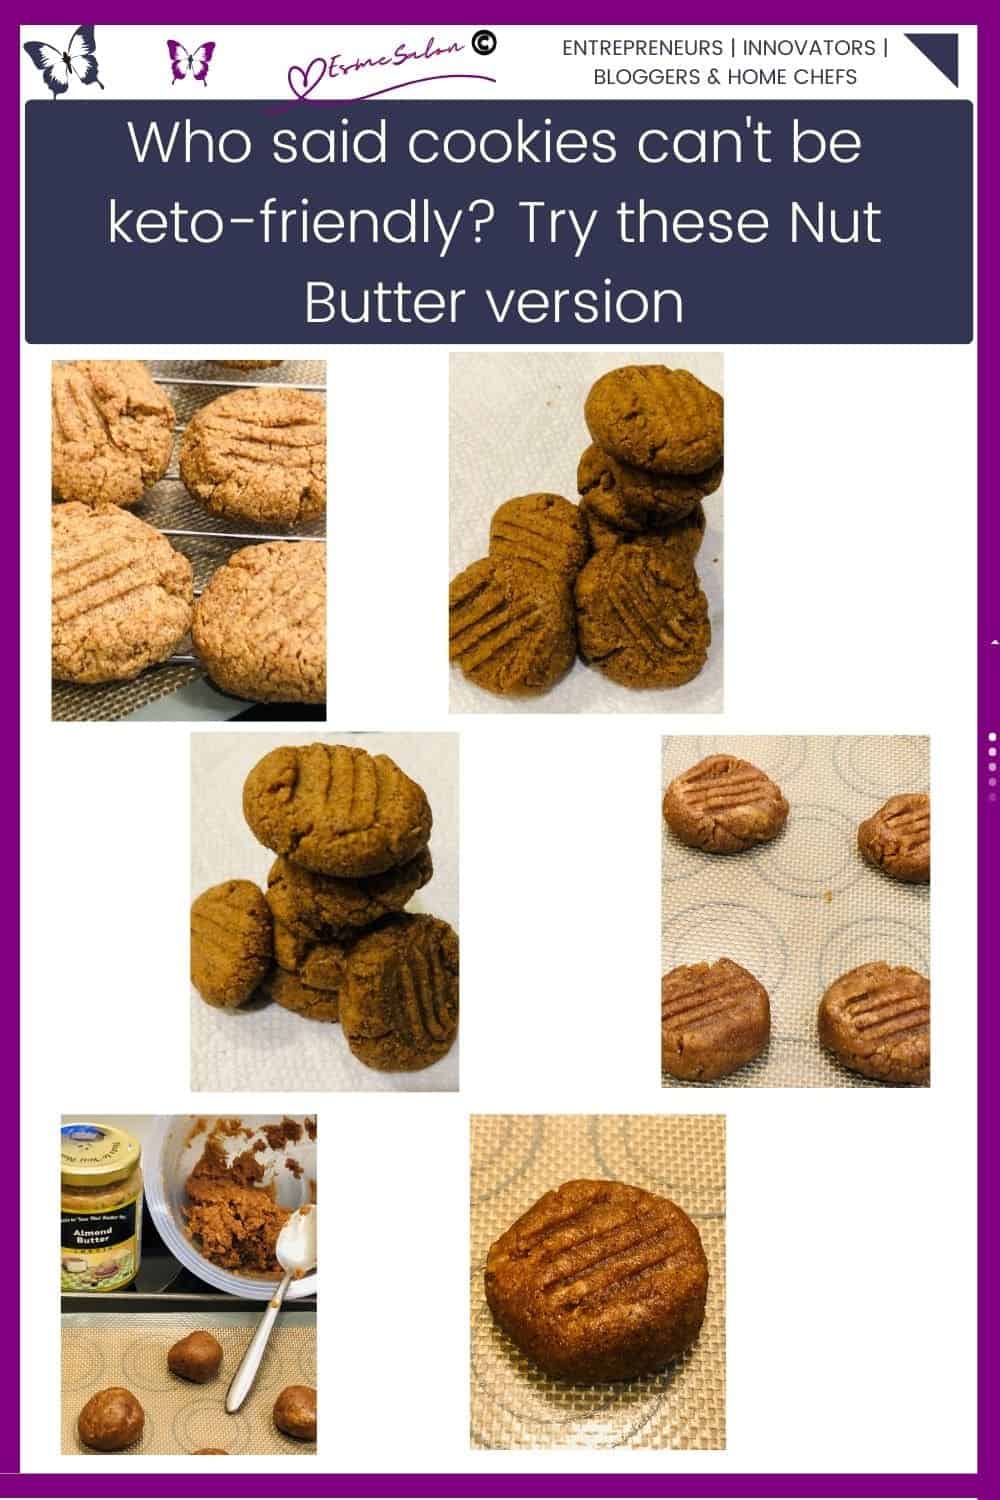 An image of Keto Cookies with Nut Butter in various stages of preparation